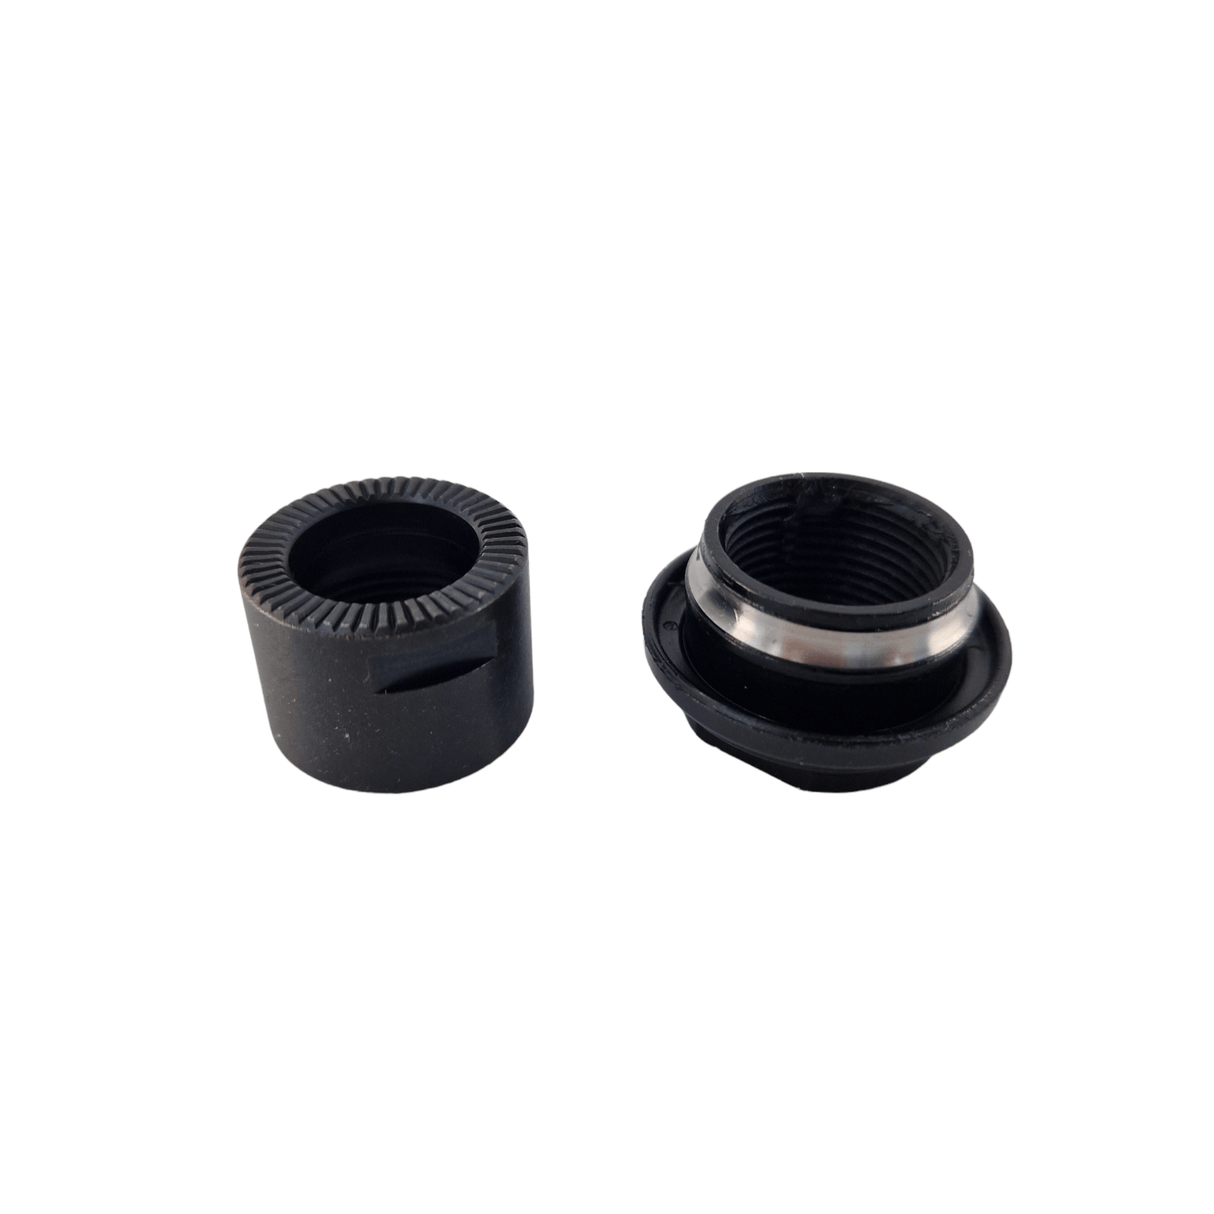 Shimano Spares FH-M678 left hand lock nut and cone with dust cover; M15